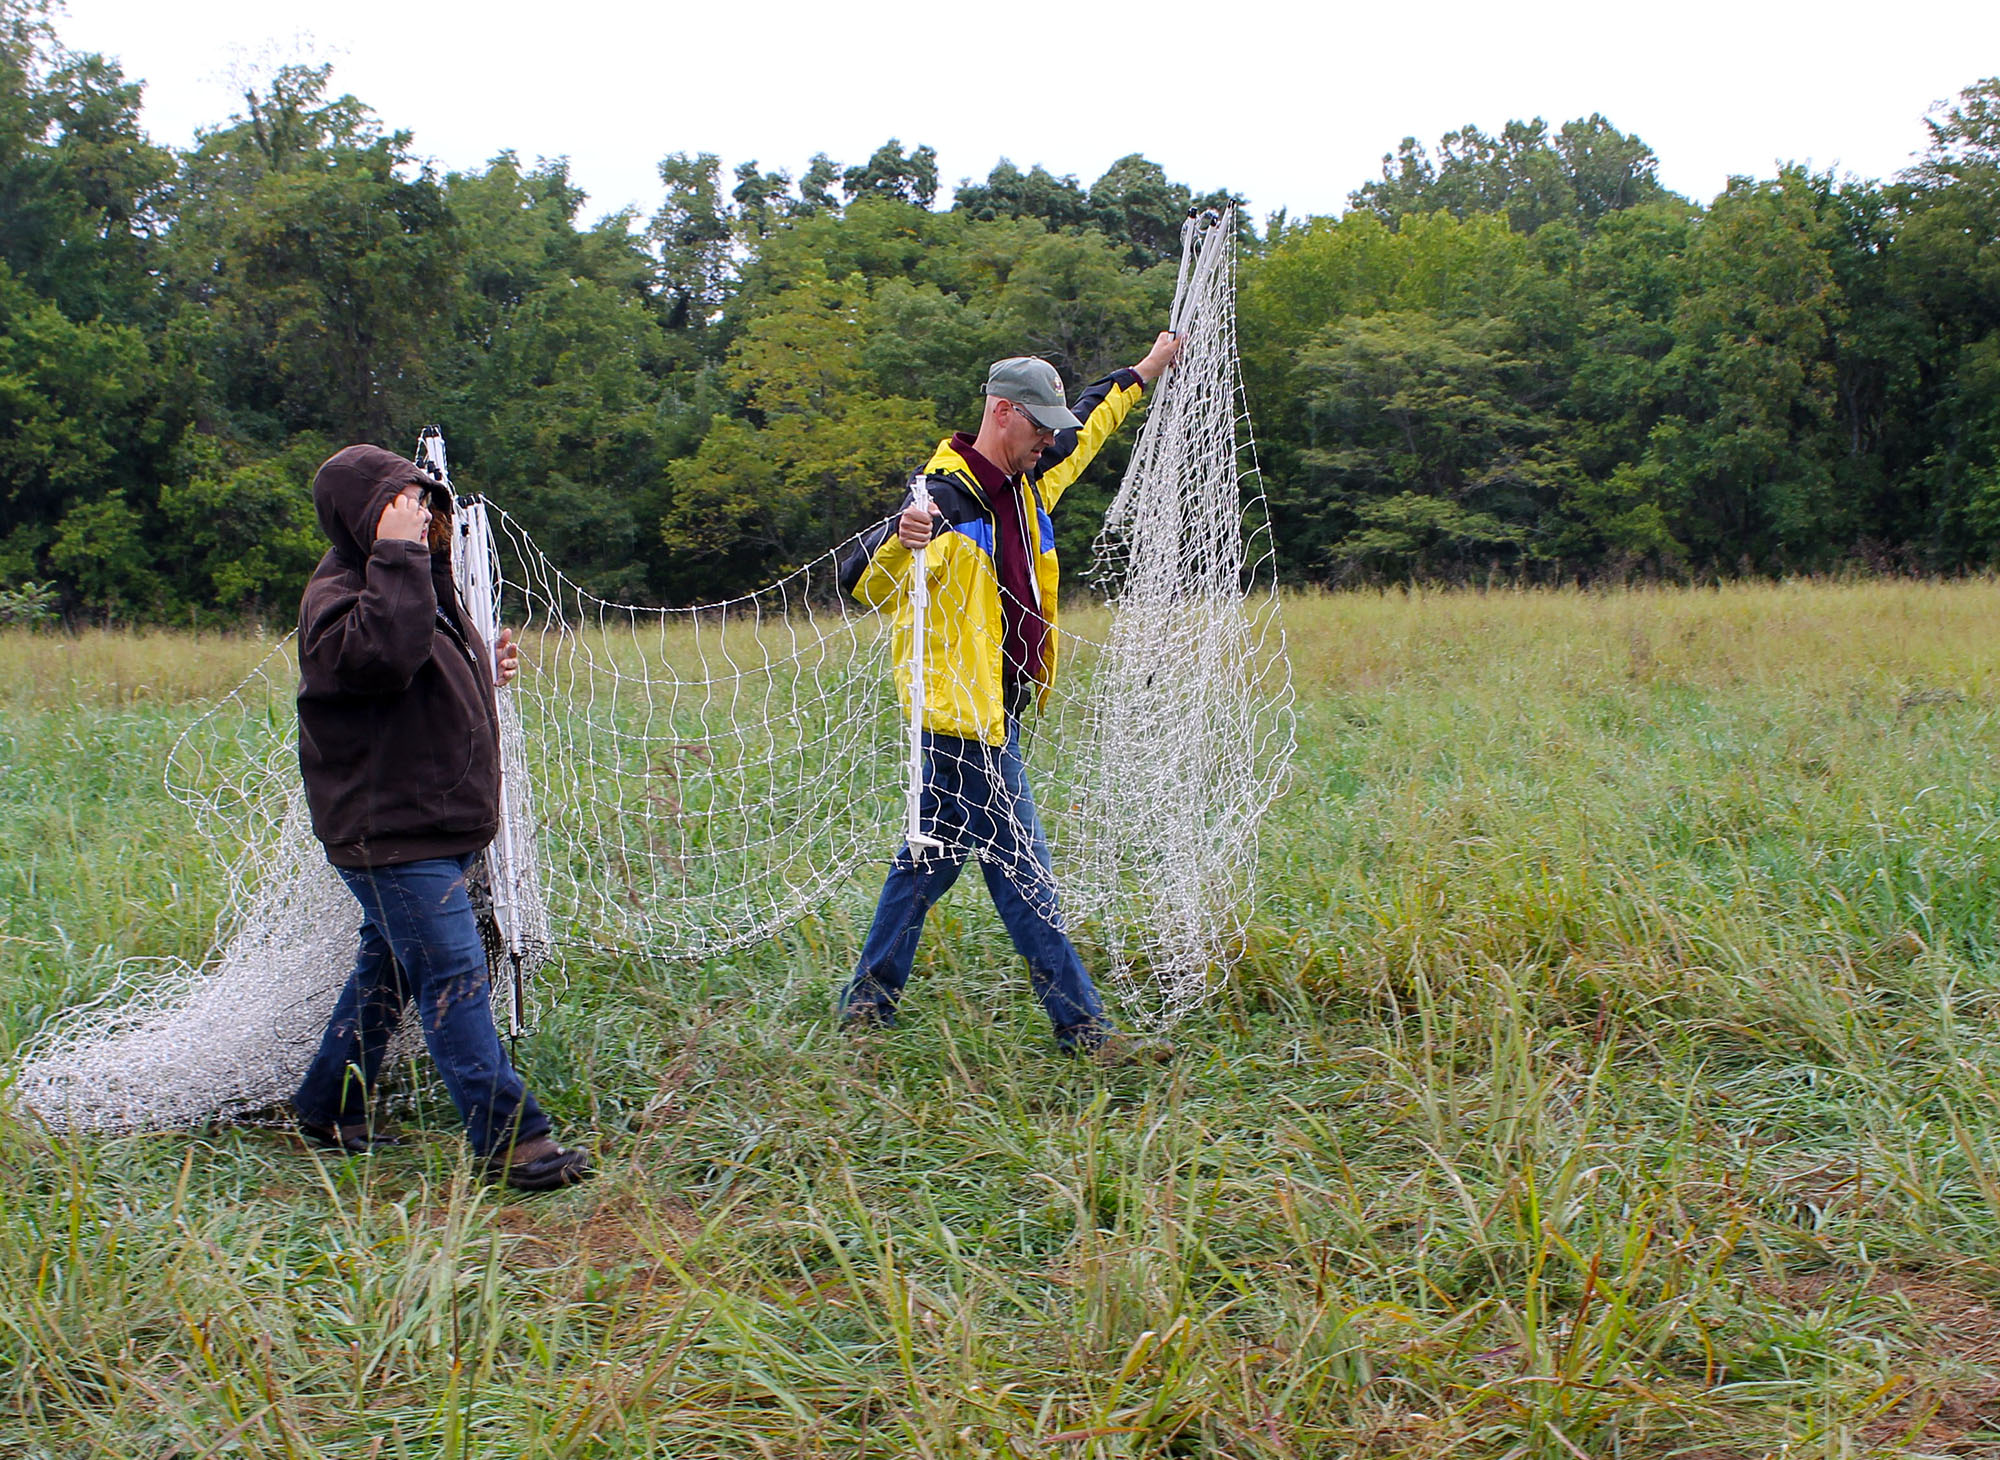 two people carrying net fencing in a pasture